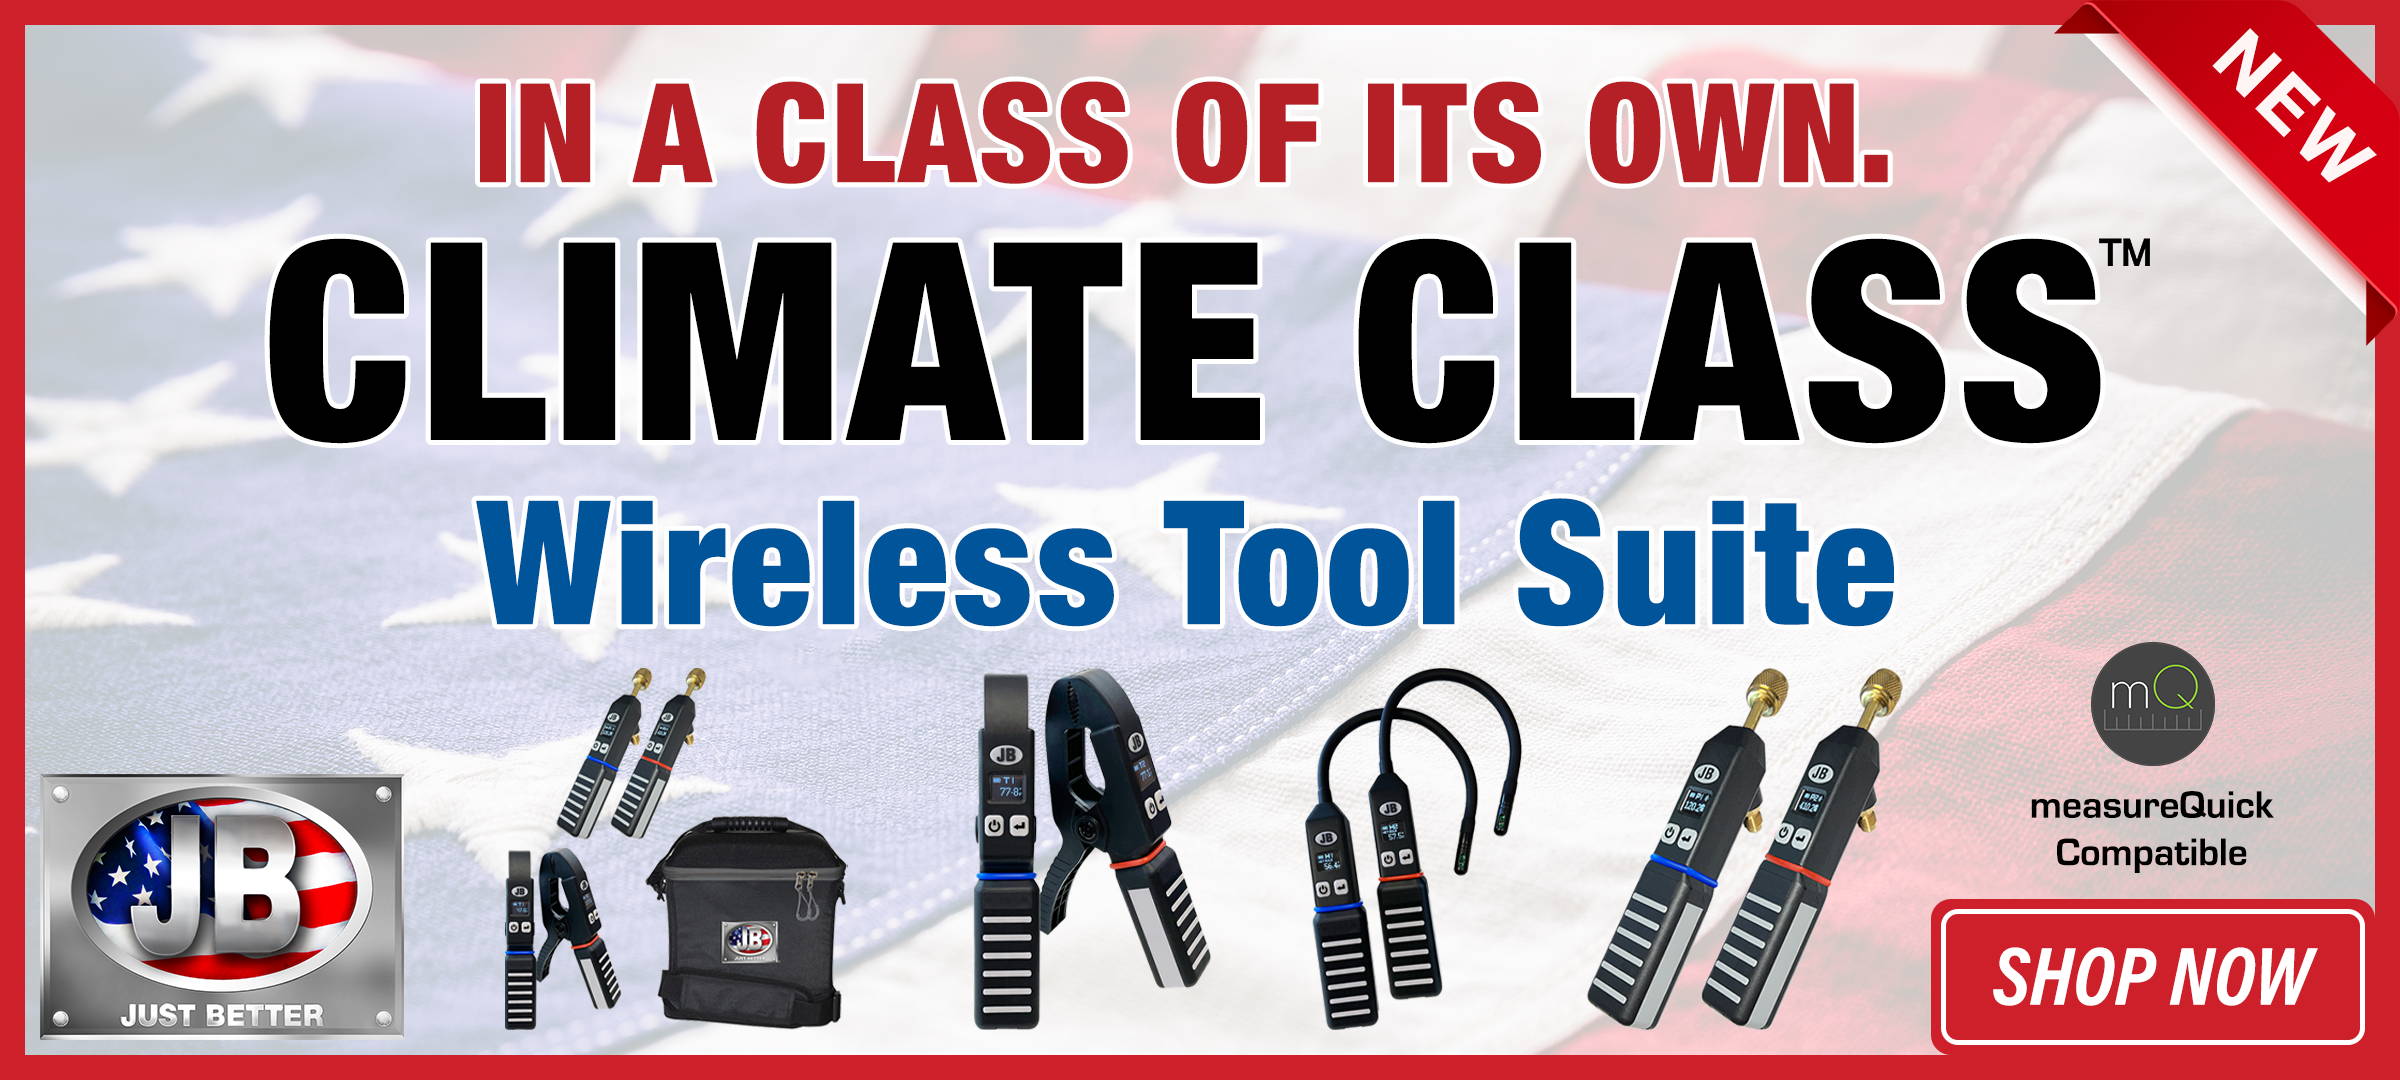 JB Climate Class products are in a class of their own. Shop now